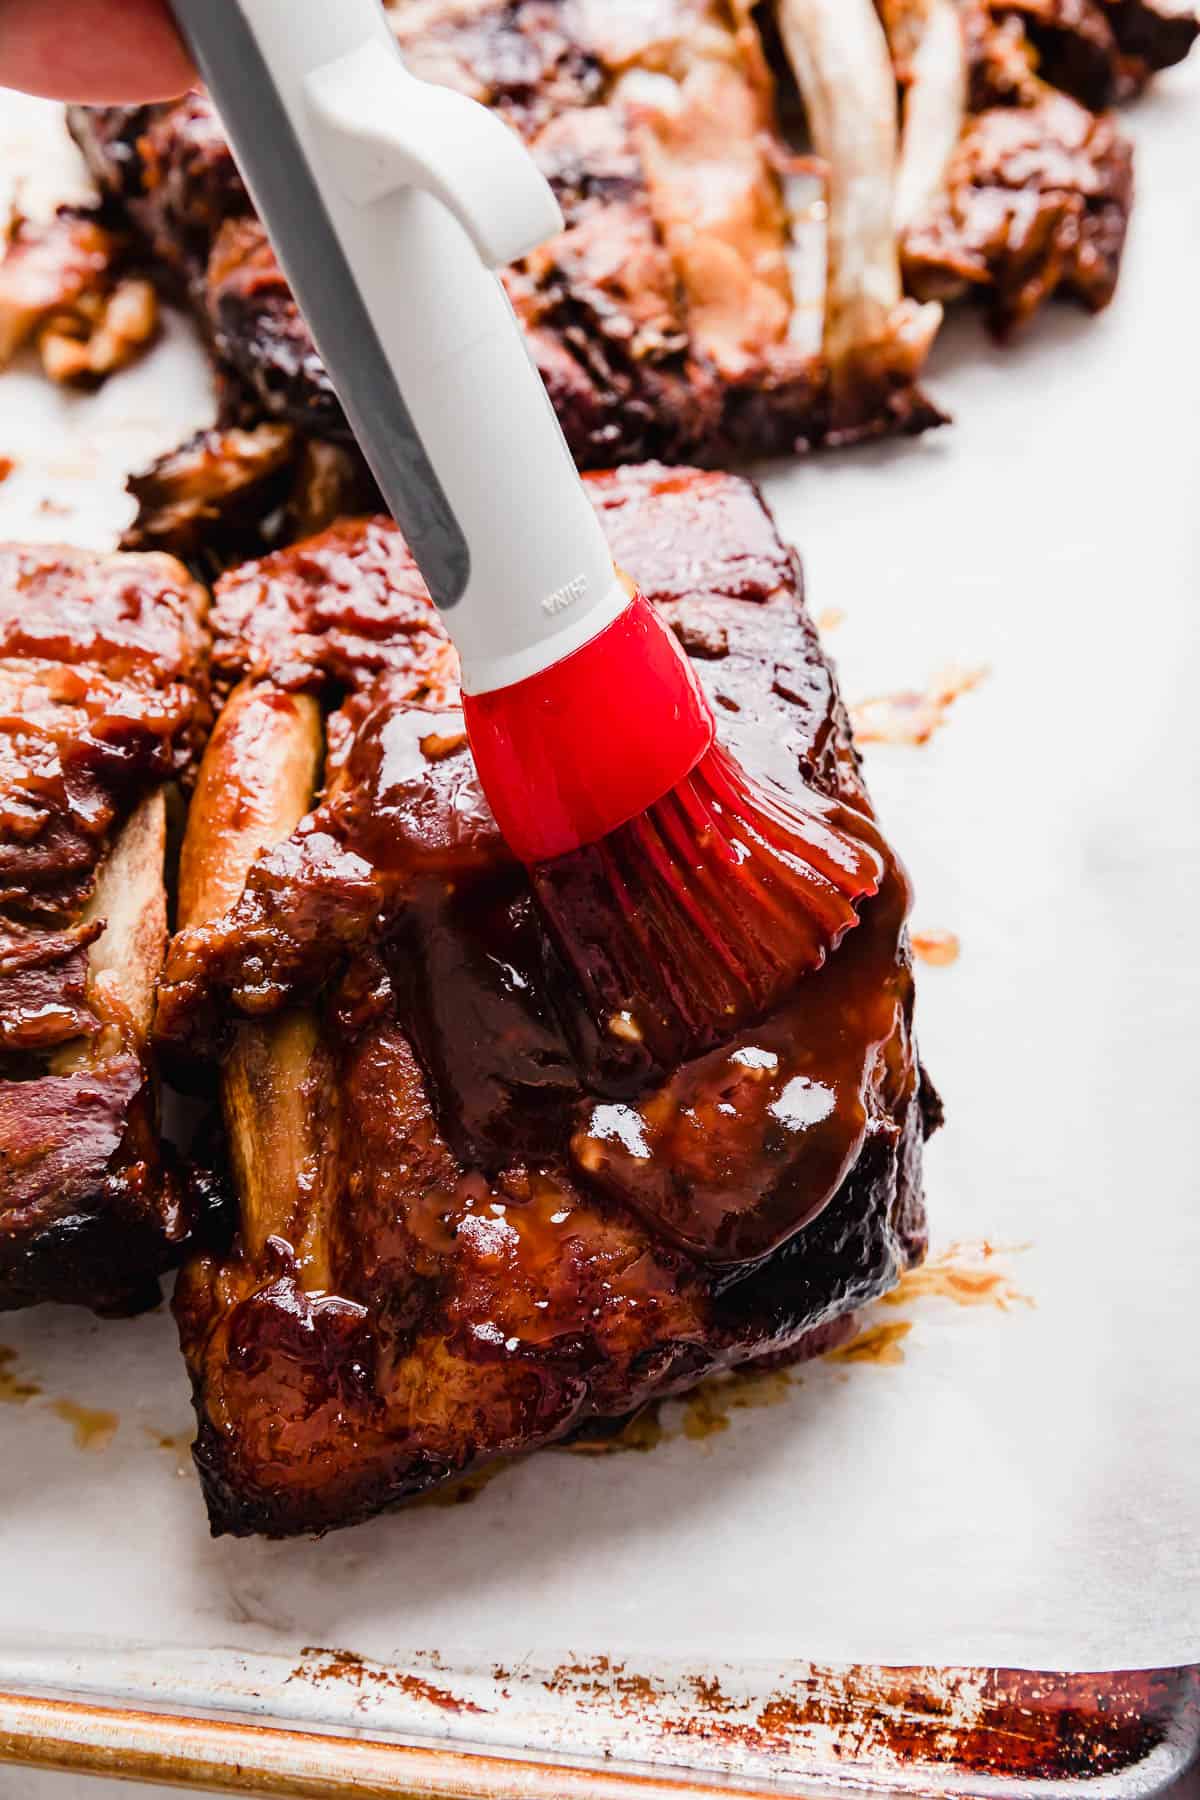 A red pastry brush spreading a dark rib sauce made with Coca Cola, overtop cooked pork ribs.